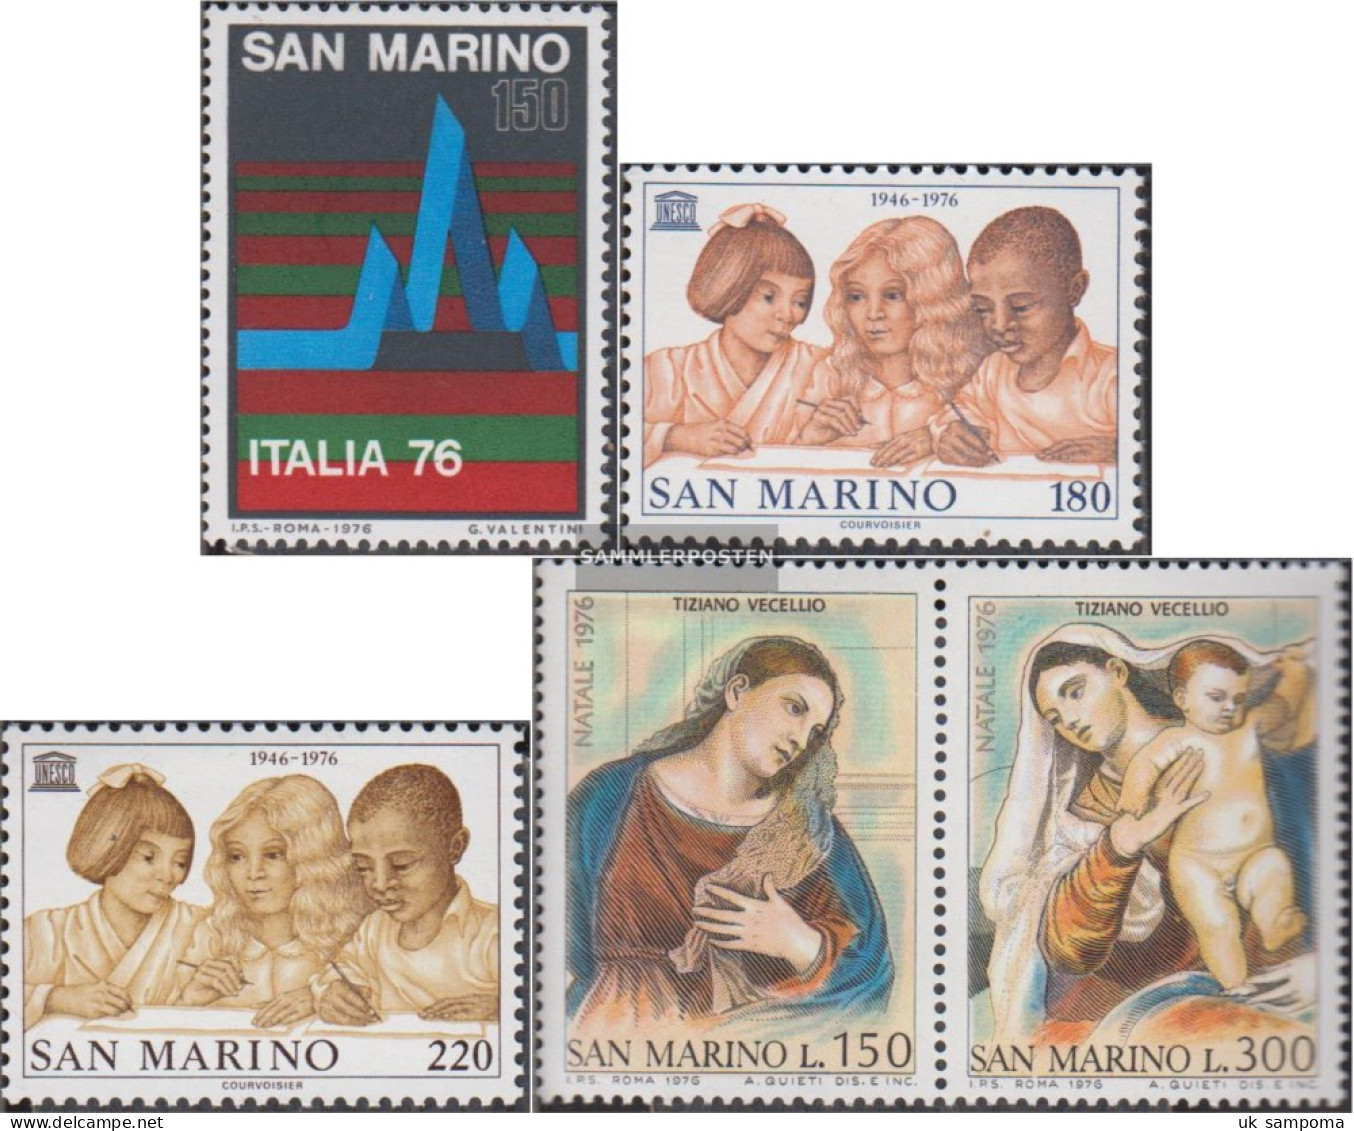 San Marino 1122,1123-1124,1125-1126 Couple (complete Issue) Unmounted Mint / Never Hinged 1976 Philately, UNESCO, Christ - Neufs